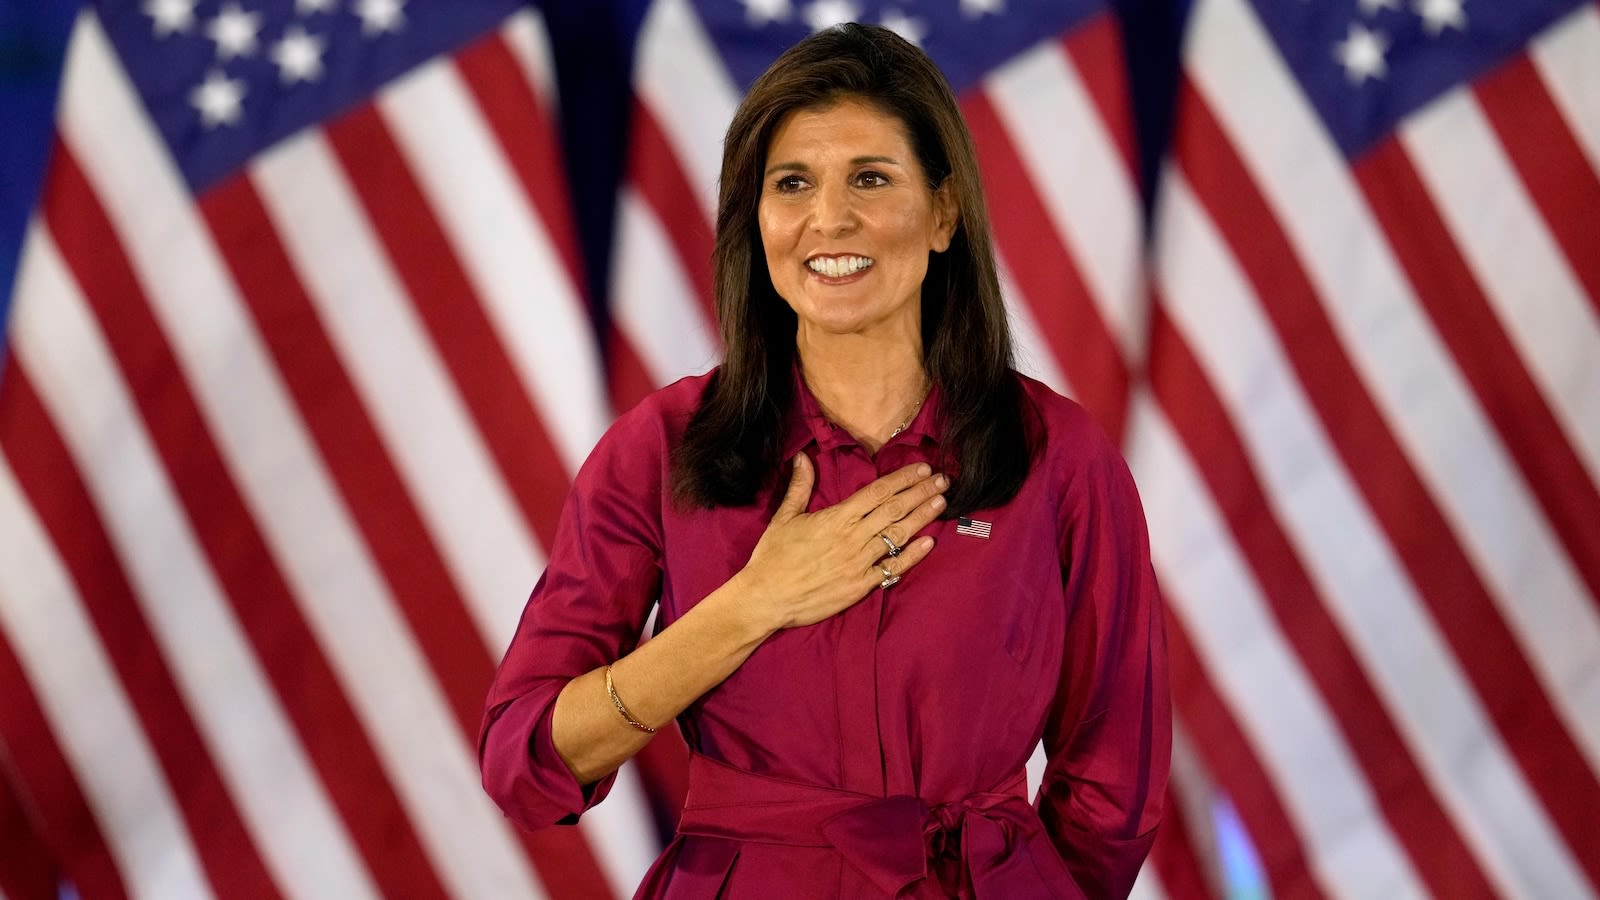 Nikki Haley won 20% of votes in Indiana Republican presidential primary